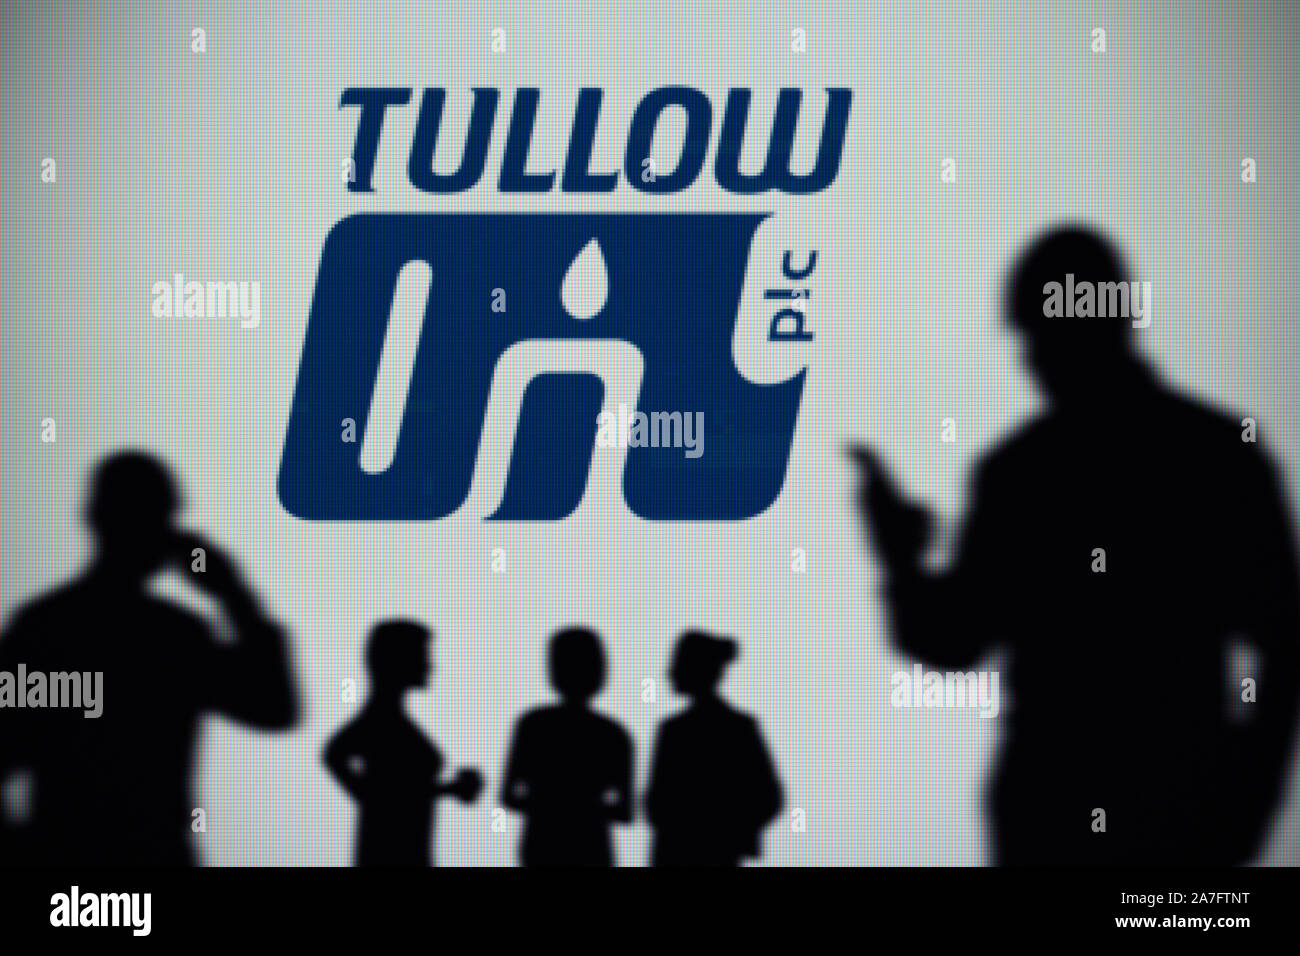 The Tullow Oil logo is seen on an LED screen in the background while a silhouetted person uses a smartphone (Editorial use only) Stock Photo